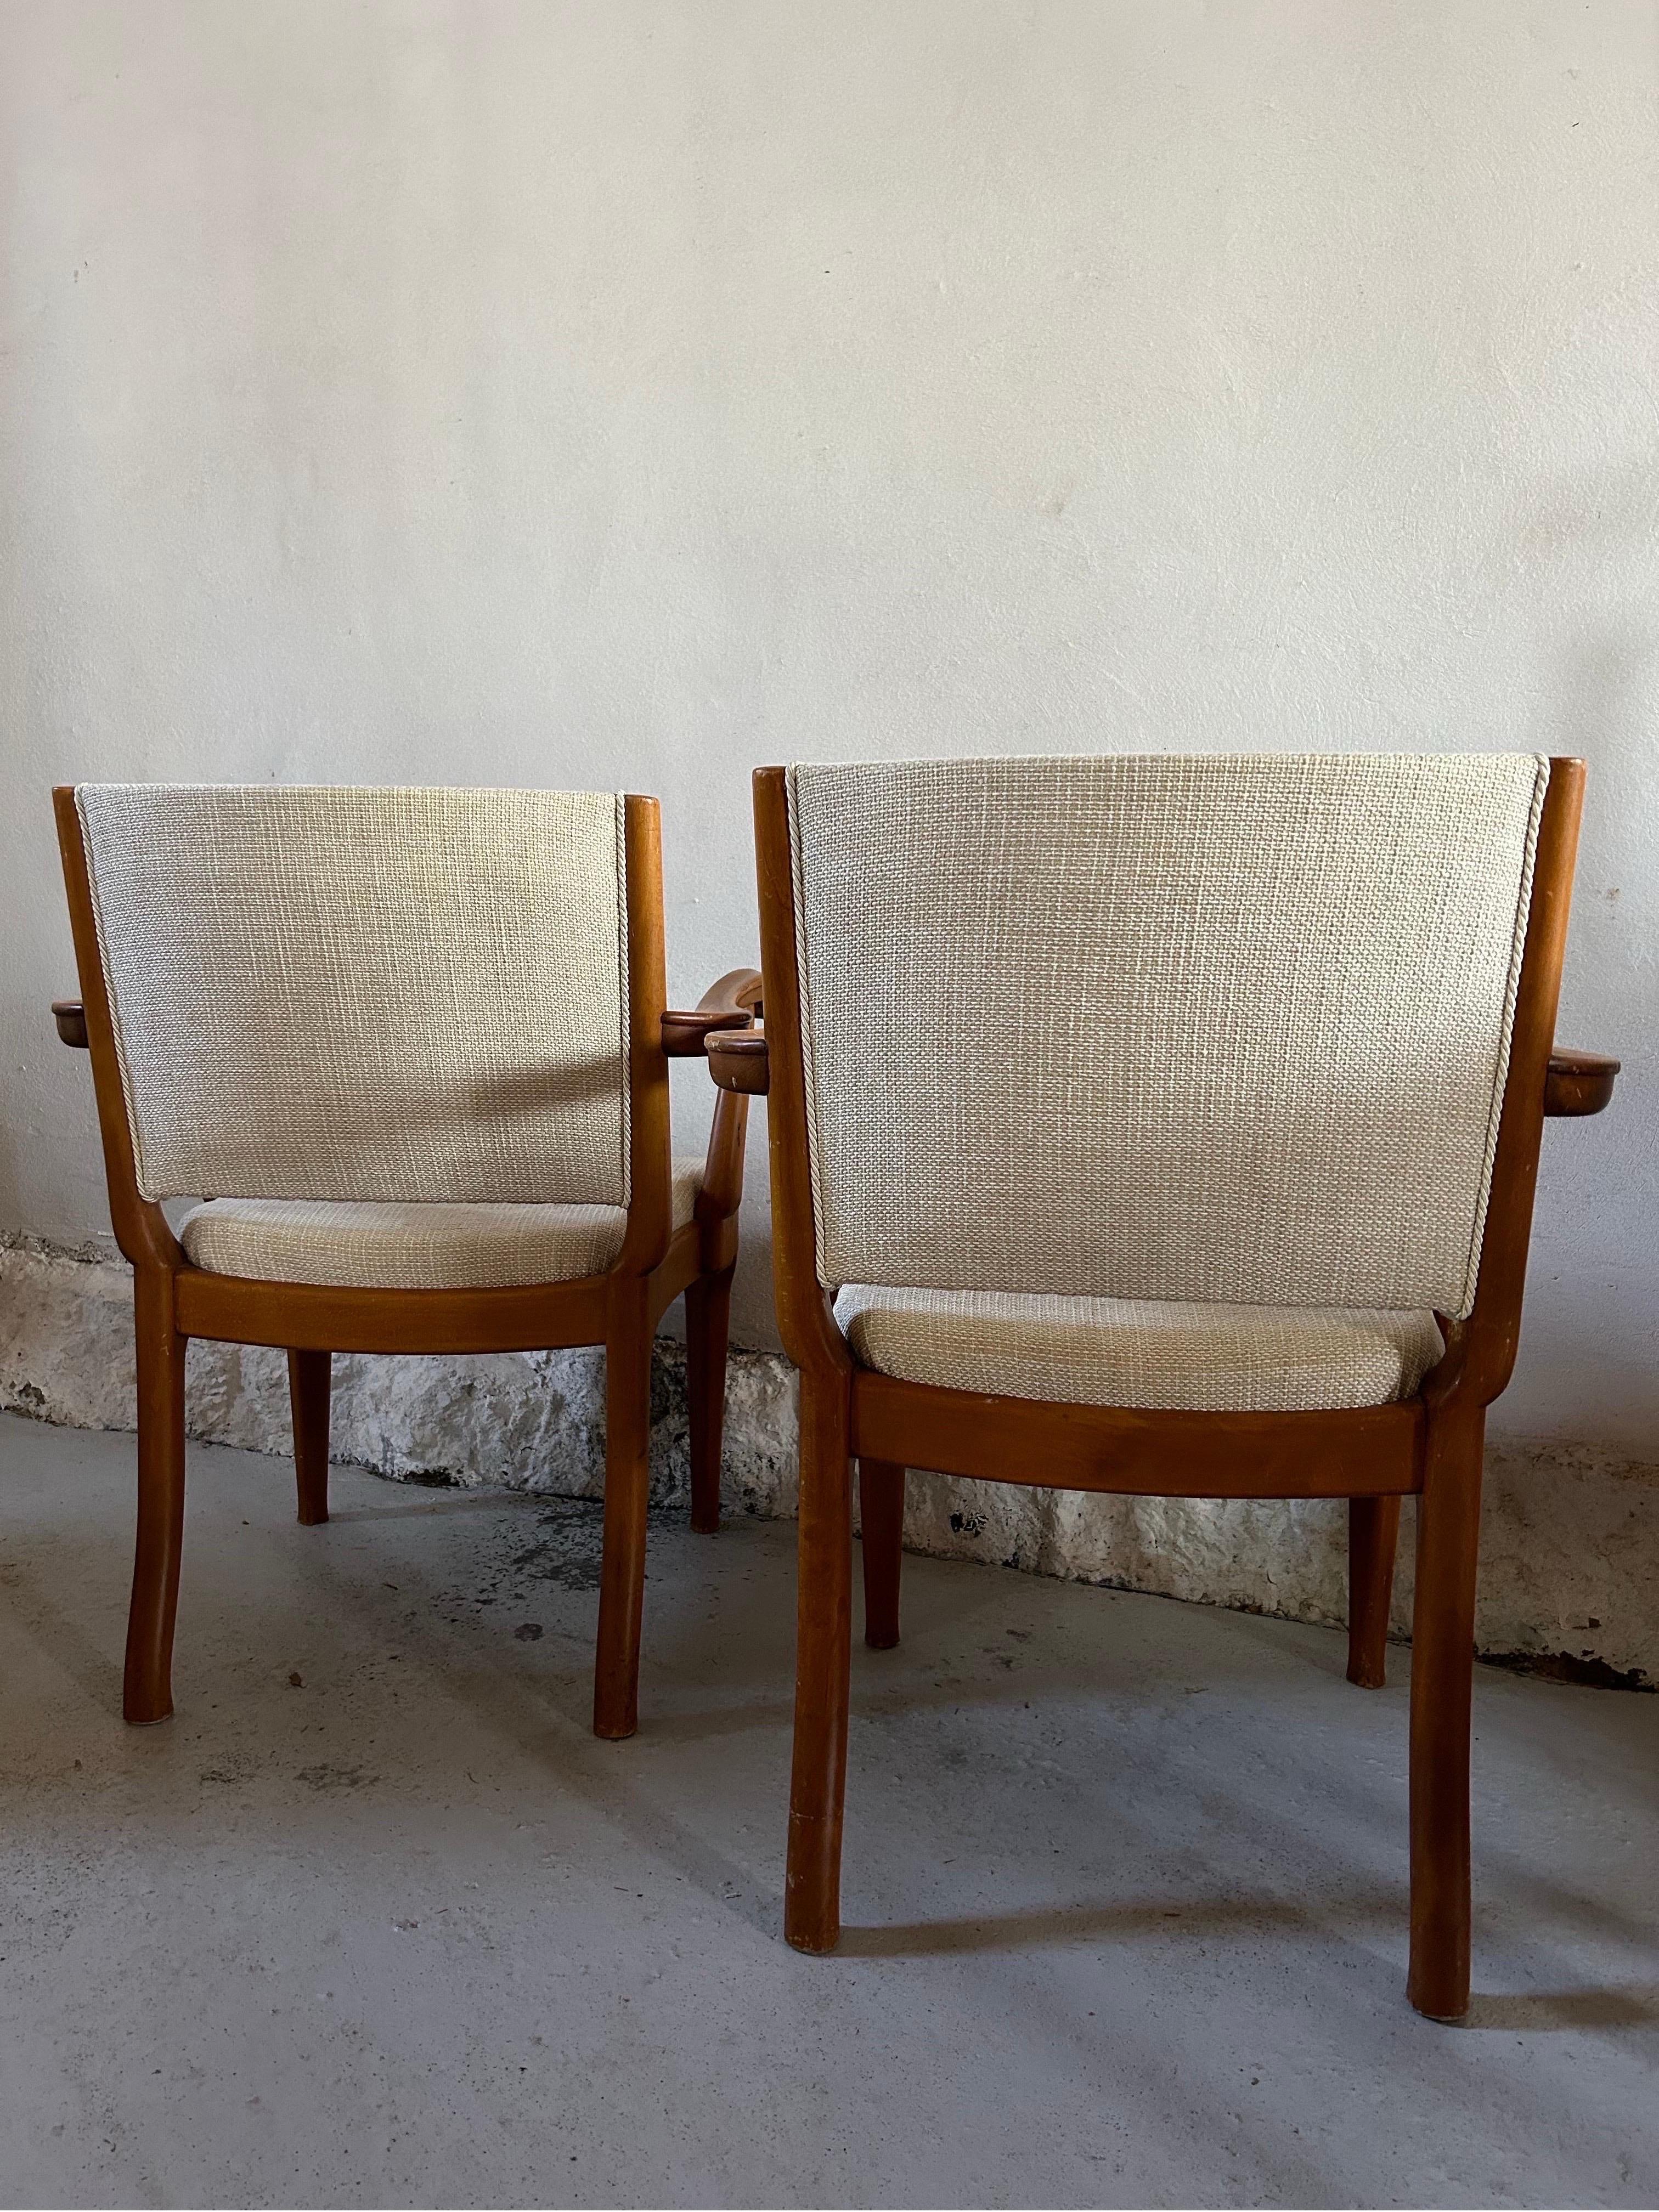 Pair of Arts and Crafts Armchairs by Thorvald Jørgensen for Fritz Hansen 1910’s For Sale 1